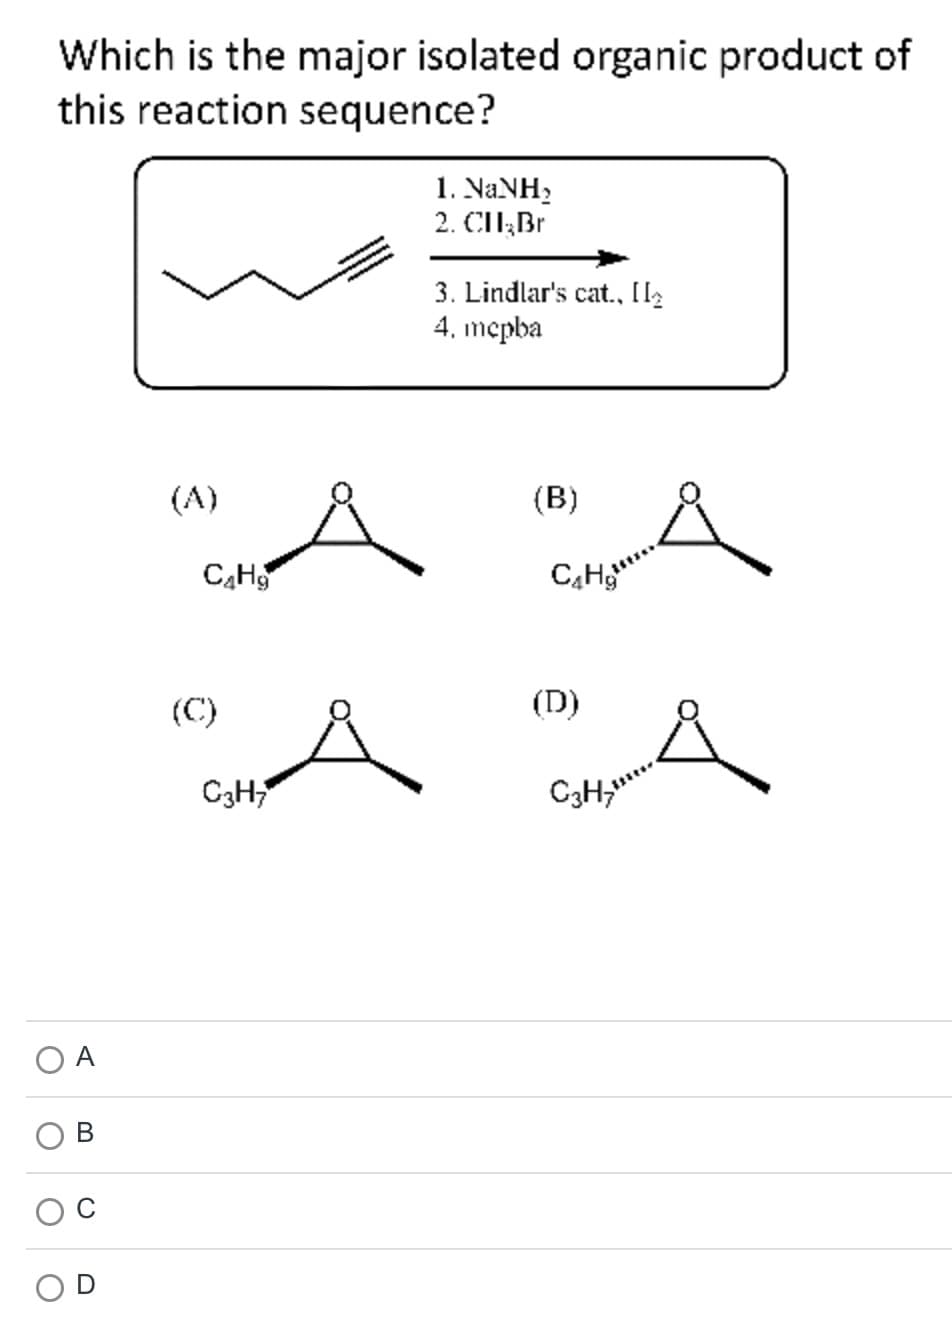 Which is the major isolated organic product of
this reaction sequence?
C
B
C₂H₂
C3H₂
1. NaNH,
2. CHI;Br
3. Lindlar's cat., [₂
4. mcpba
(B)
C₂H₂
(D)
C3H7¹